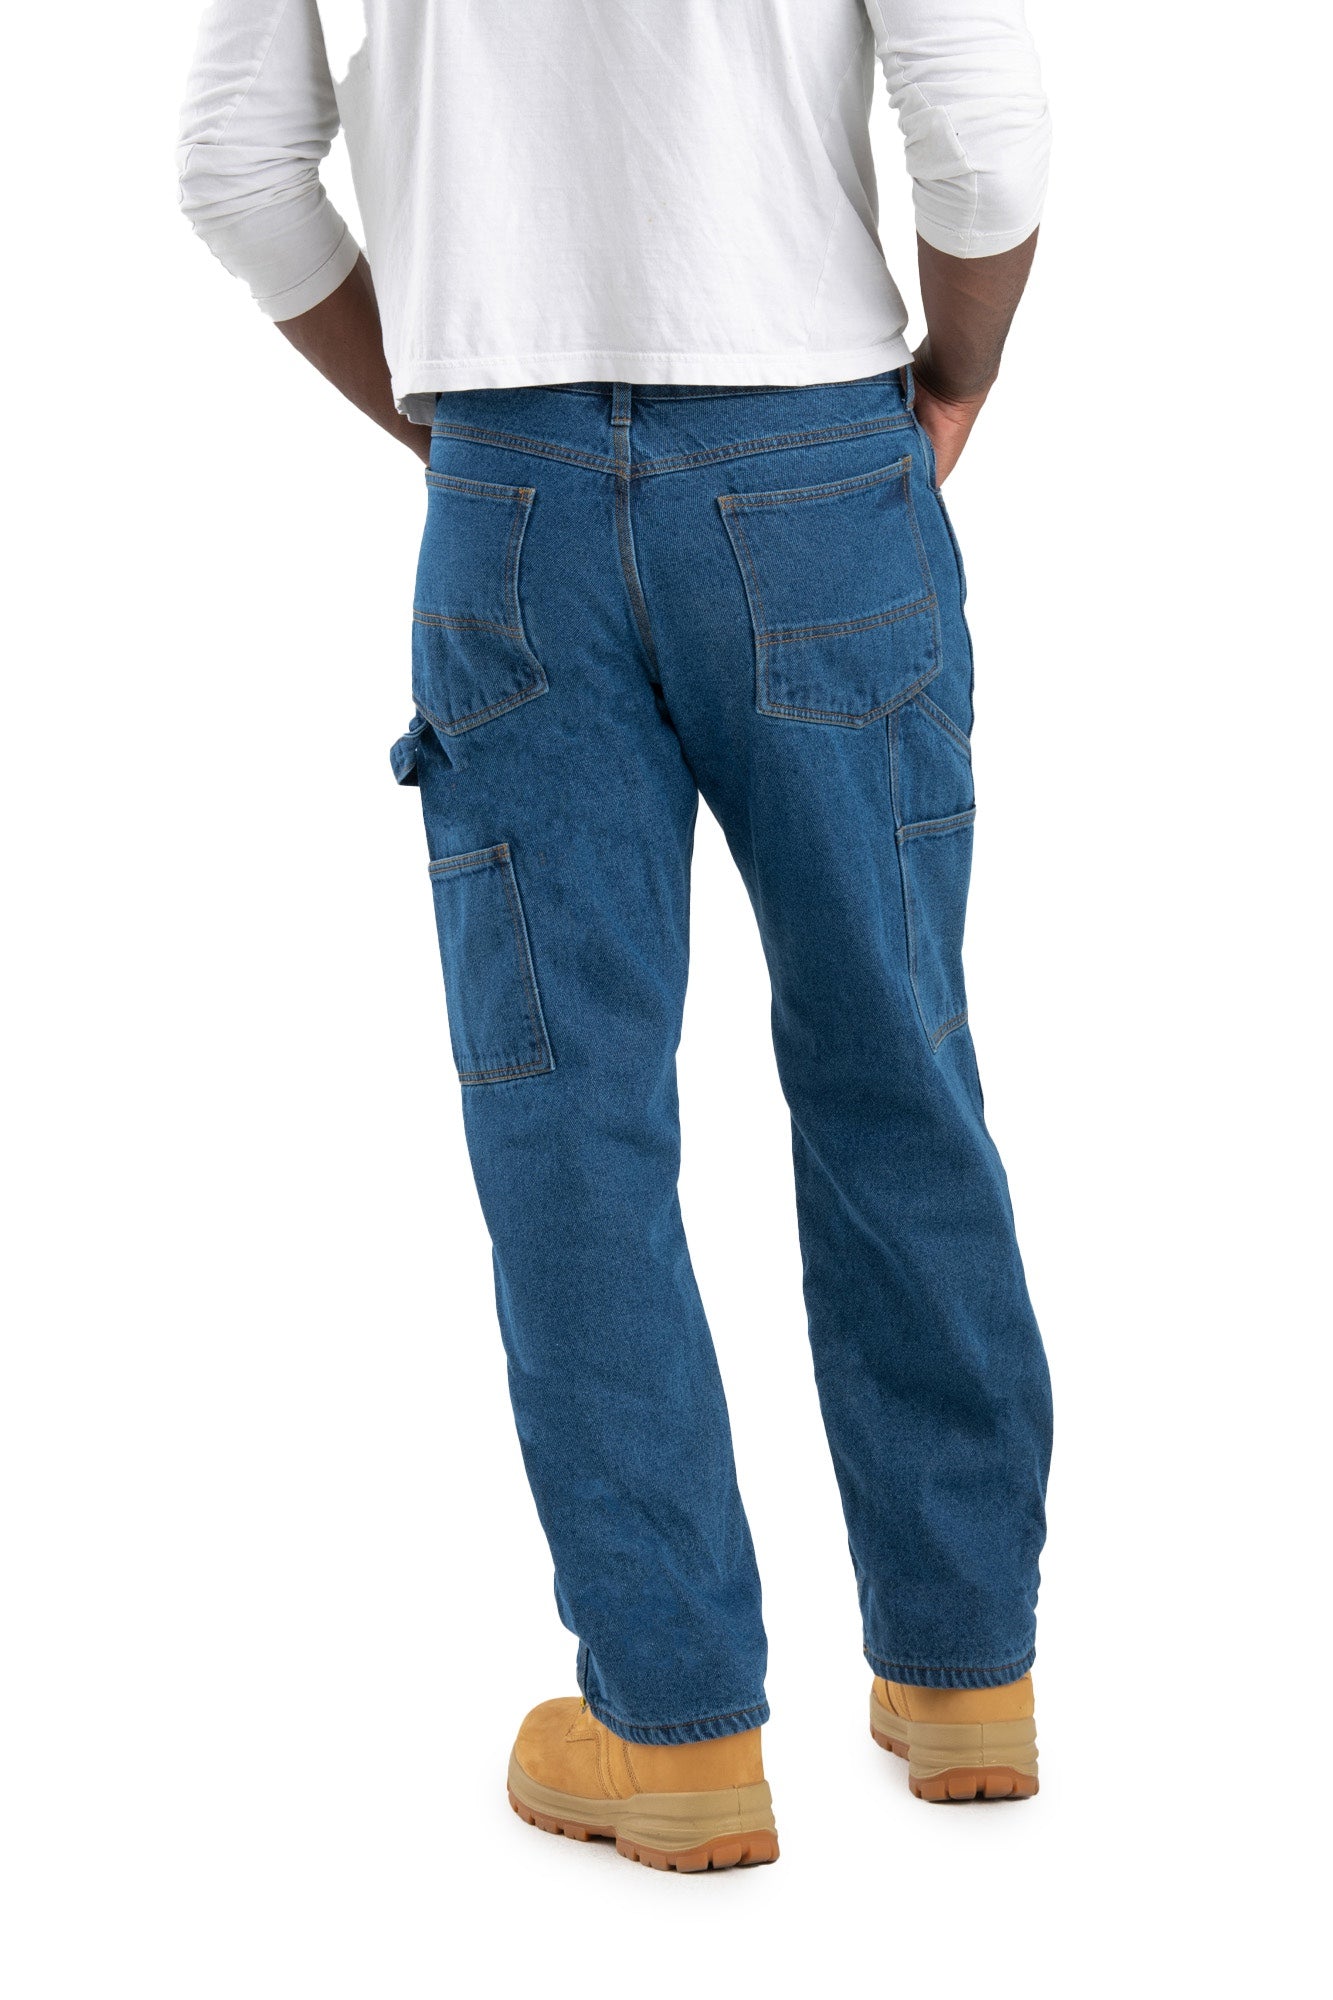 Men's Flannel Lined Washed Duck Dungaree Pant - Pants